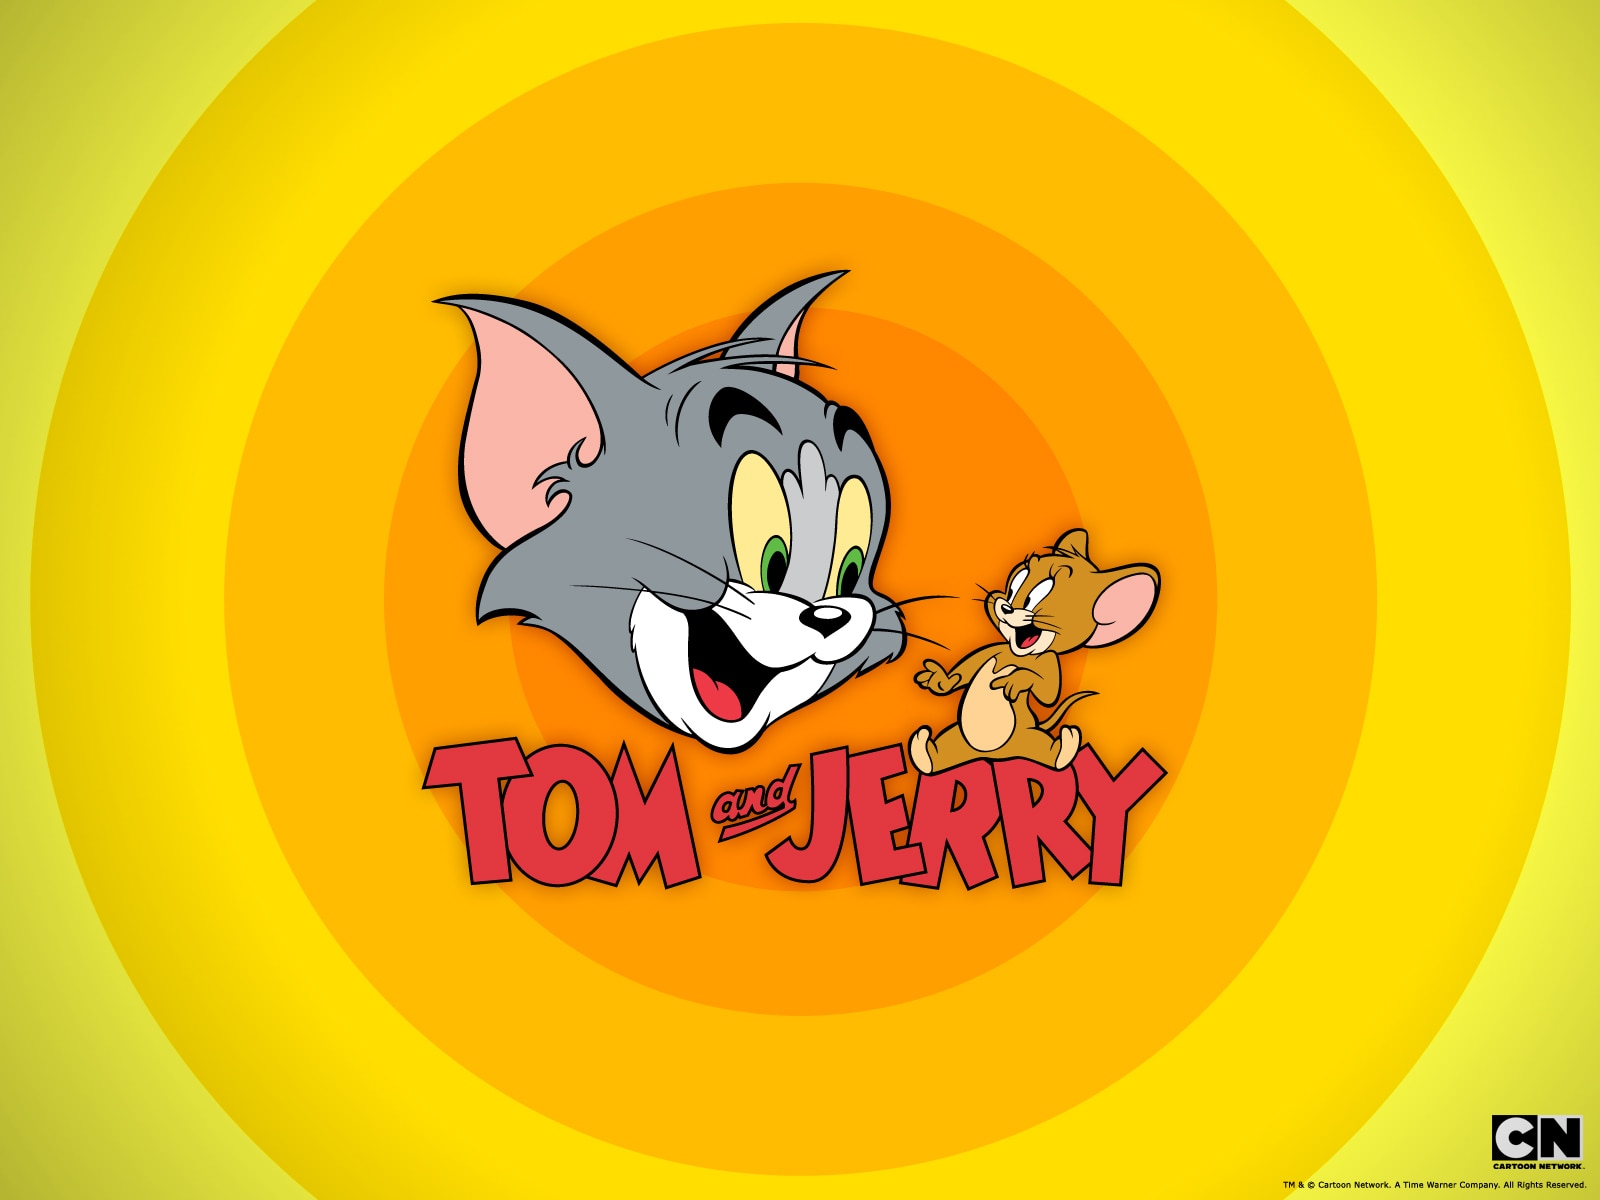 Tom and Jerry | Free Pictures and Wallpaper Downloads | Cartoon Network